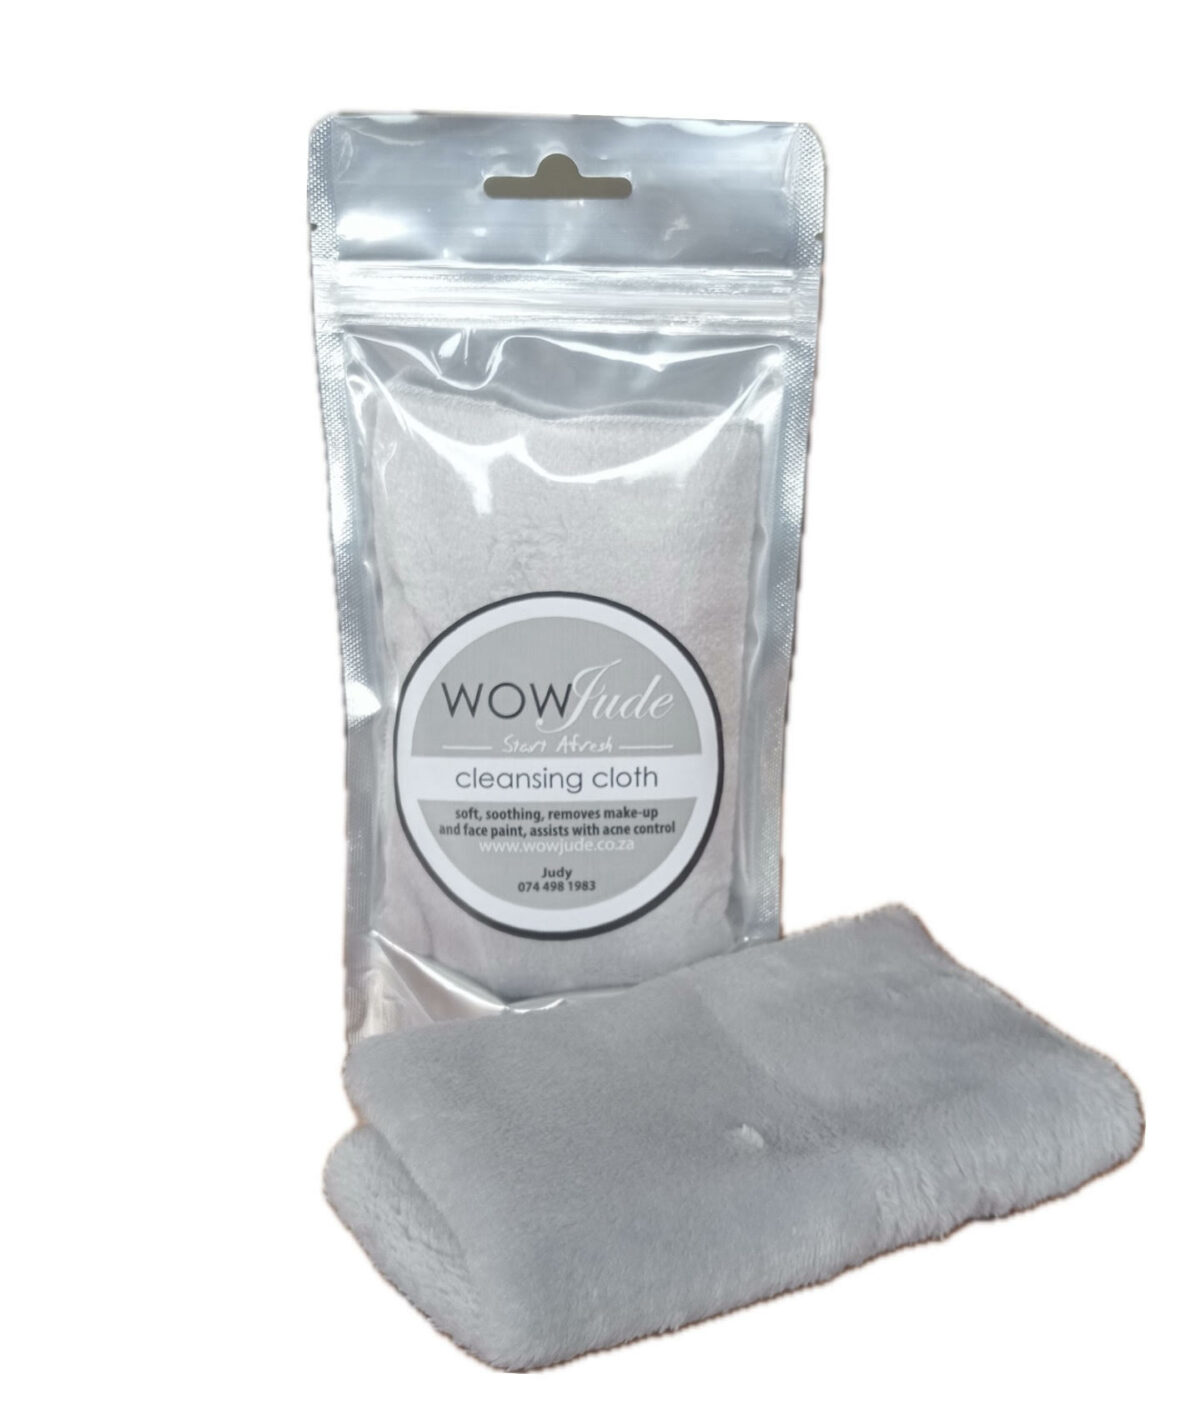 Wow Jude Facial Reusable Cleansing Cloth- Silver